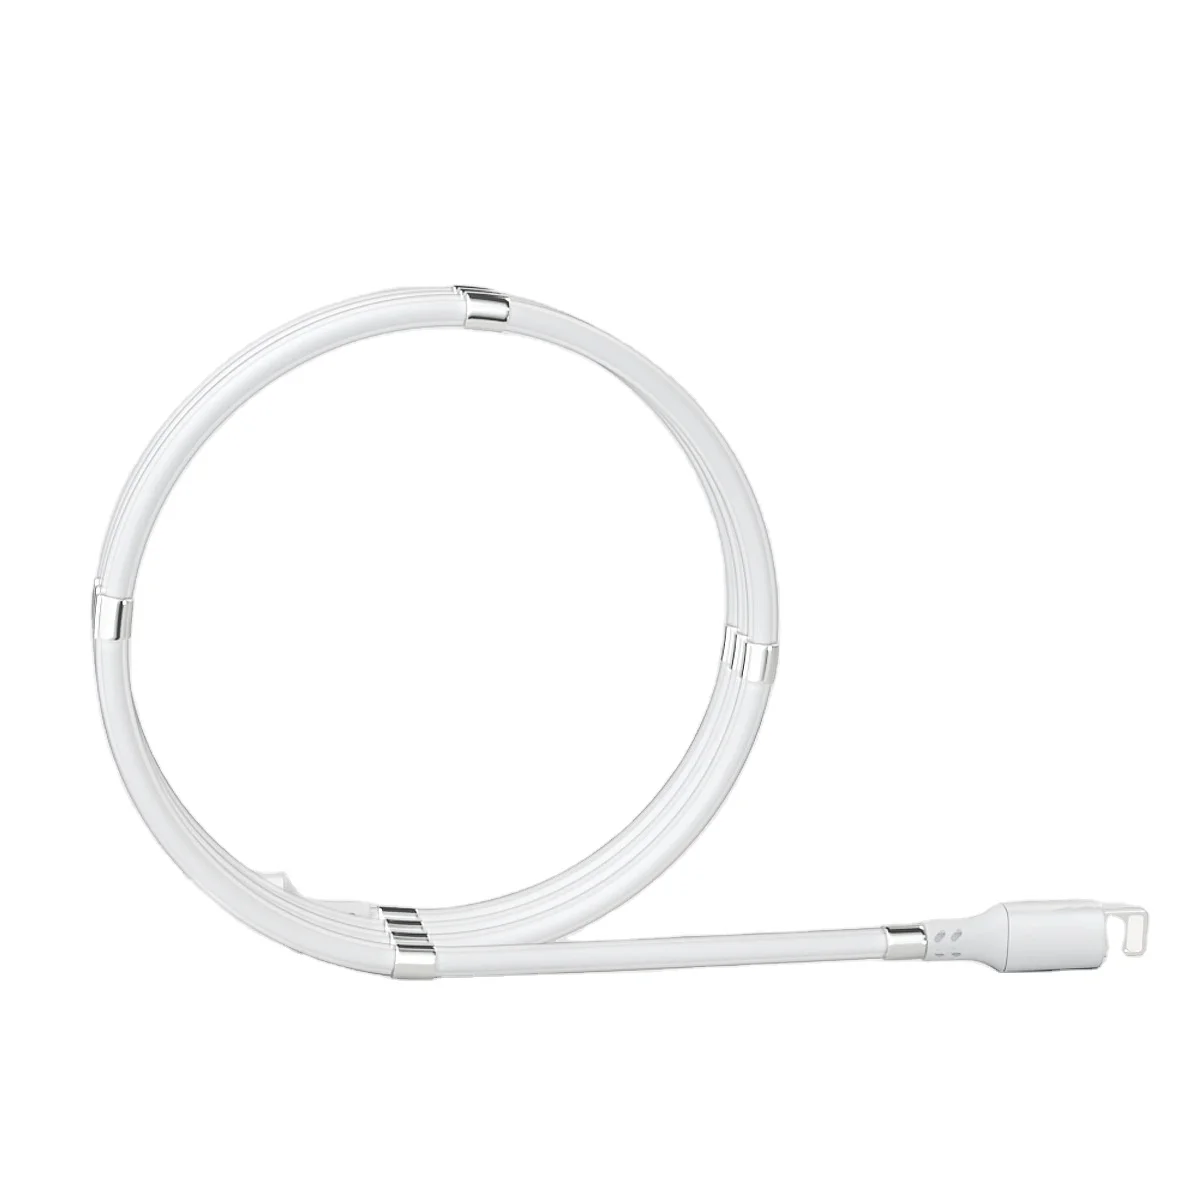 New design Self winding USB charging cable for iPhone type c micro Easy-coil redesigned supercalla magnetic charging cable - idealCable.net